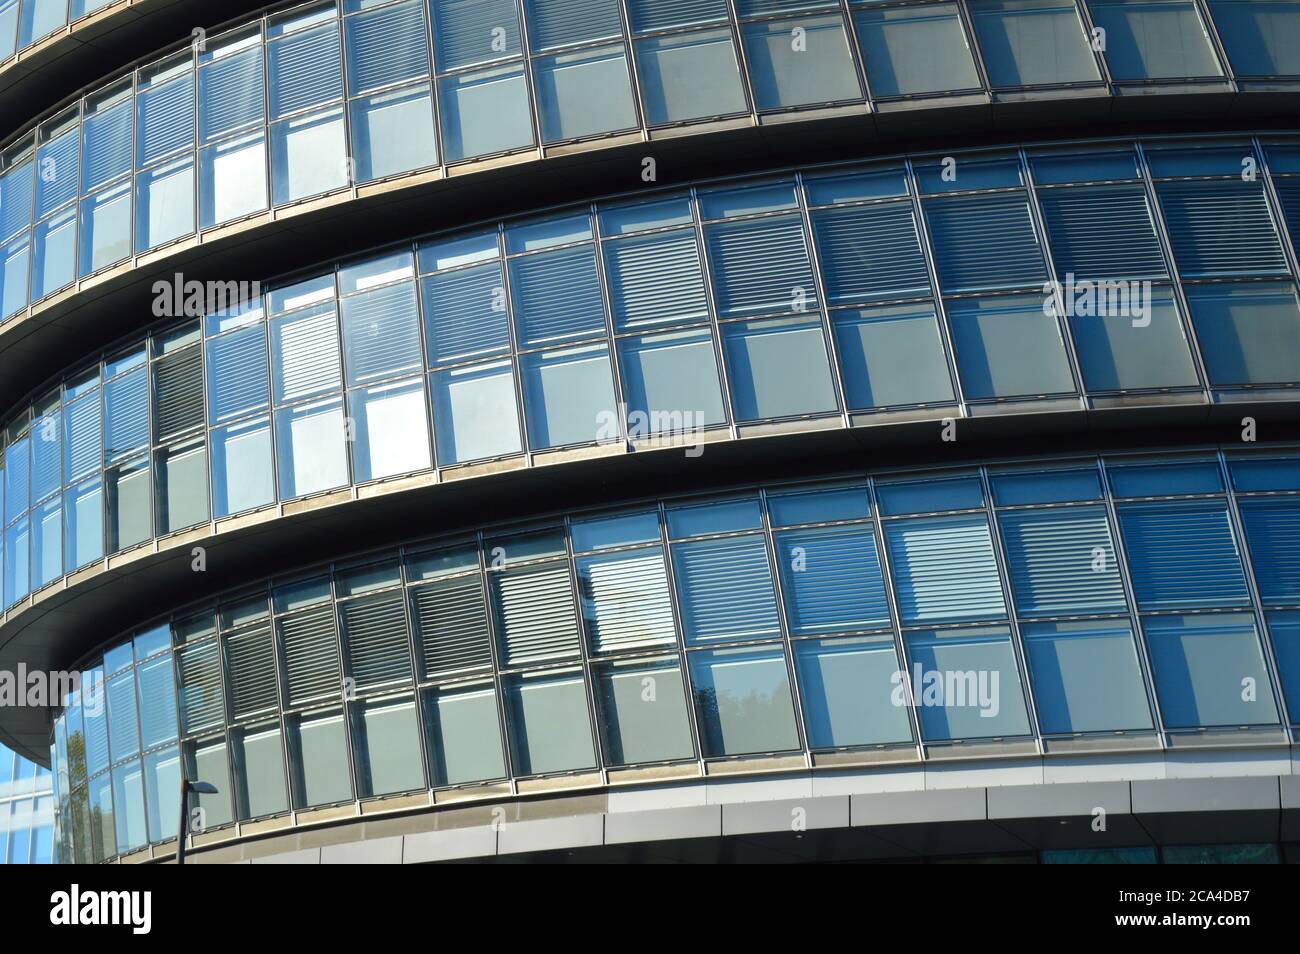 Image of glass panes of a modern building Stock Photo